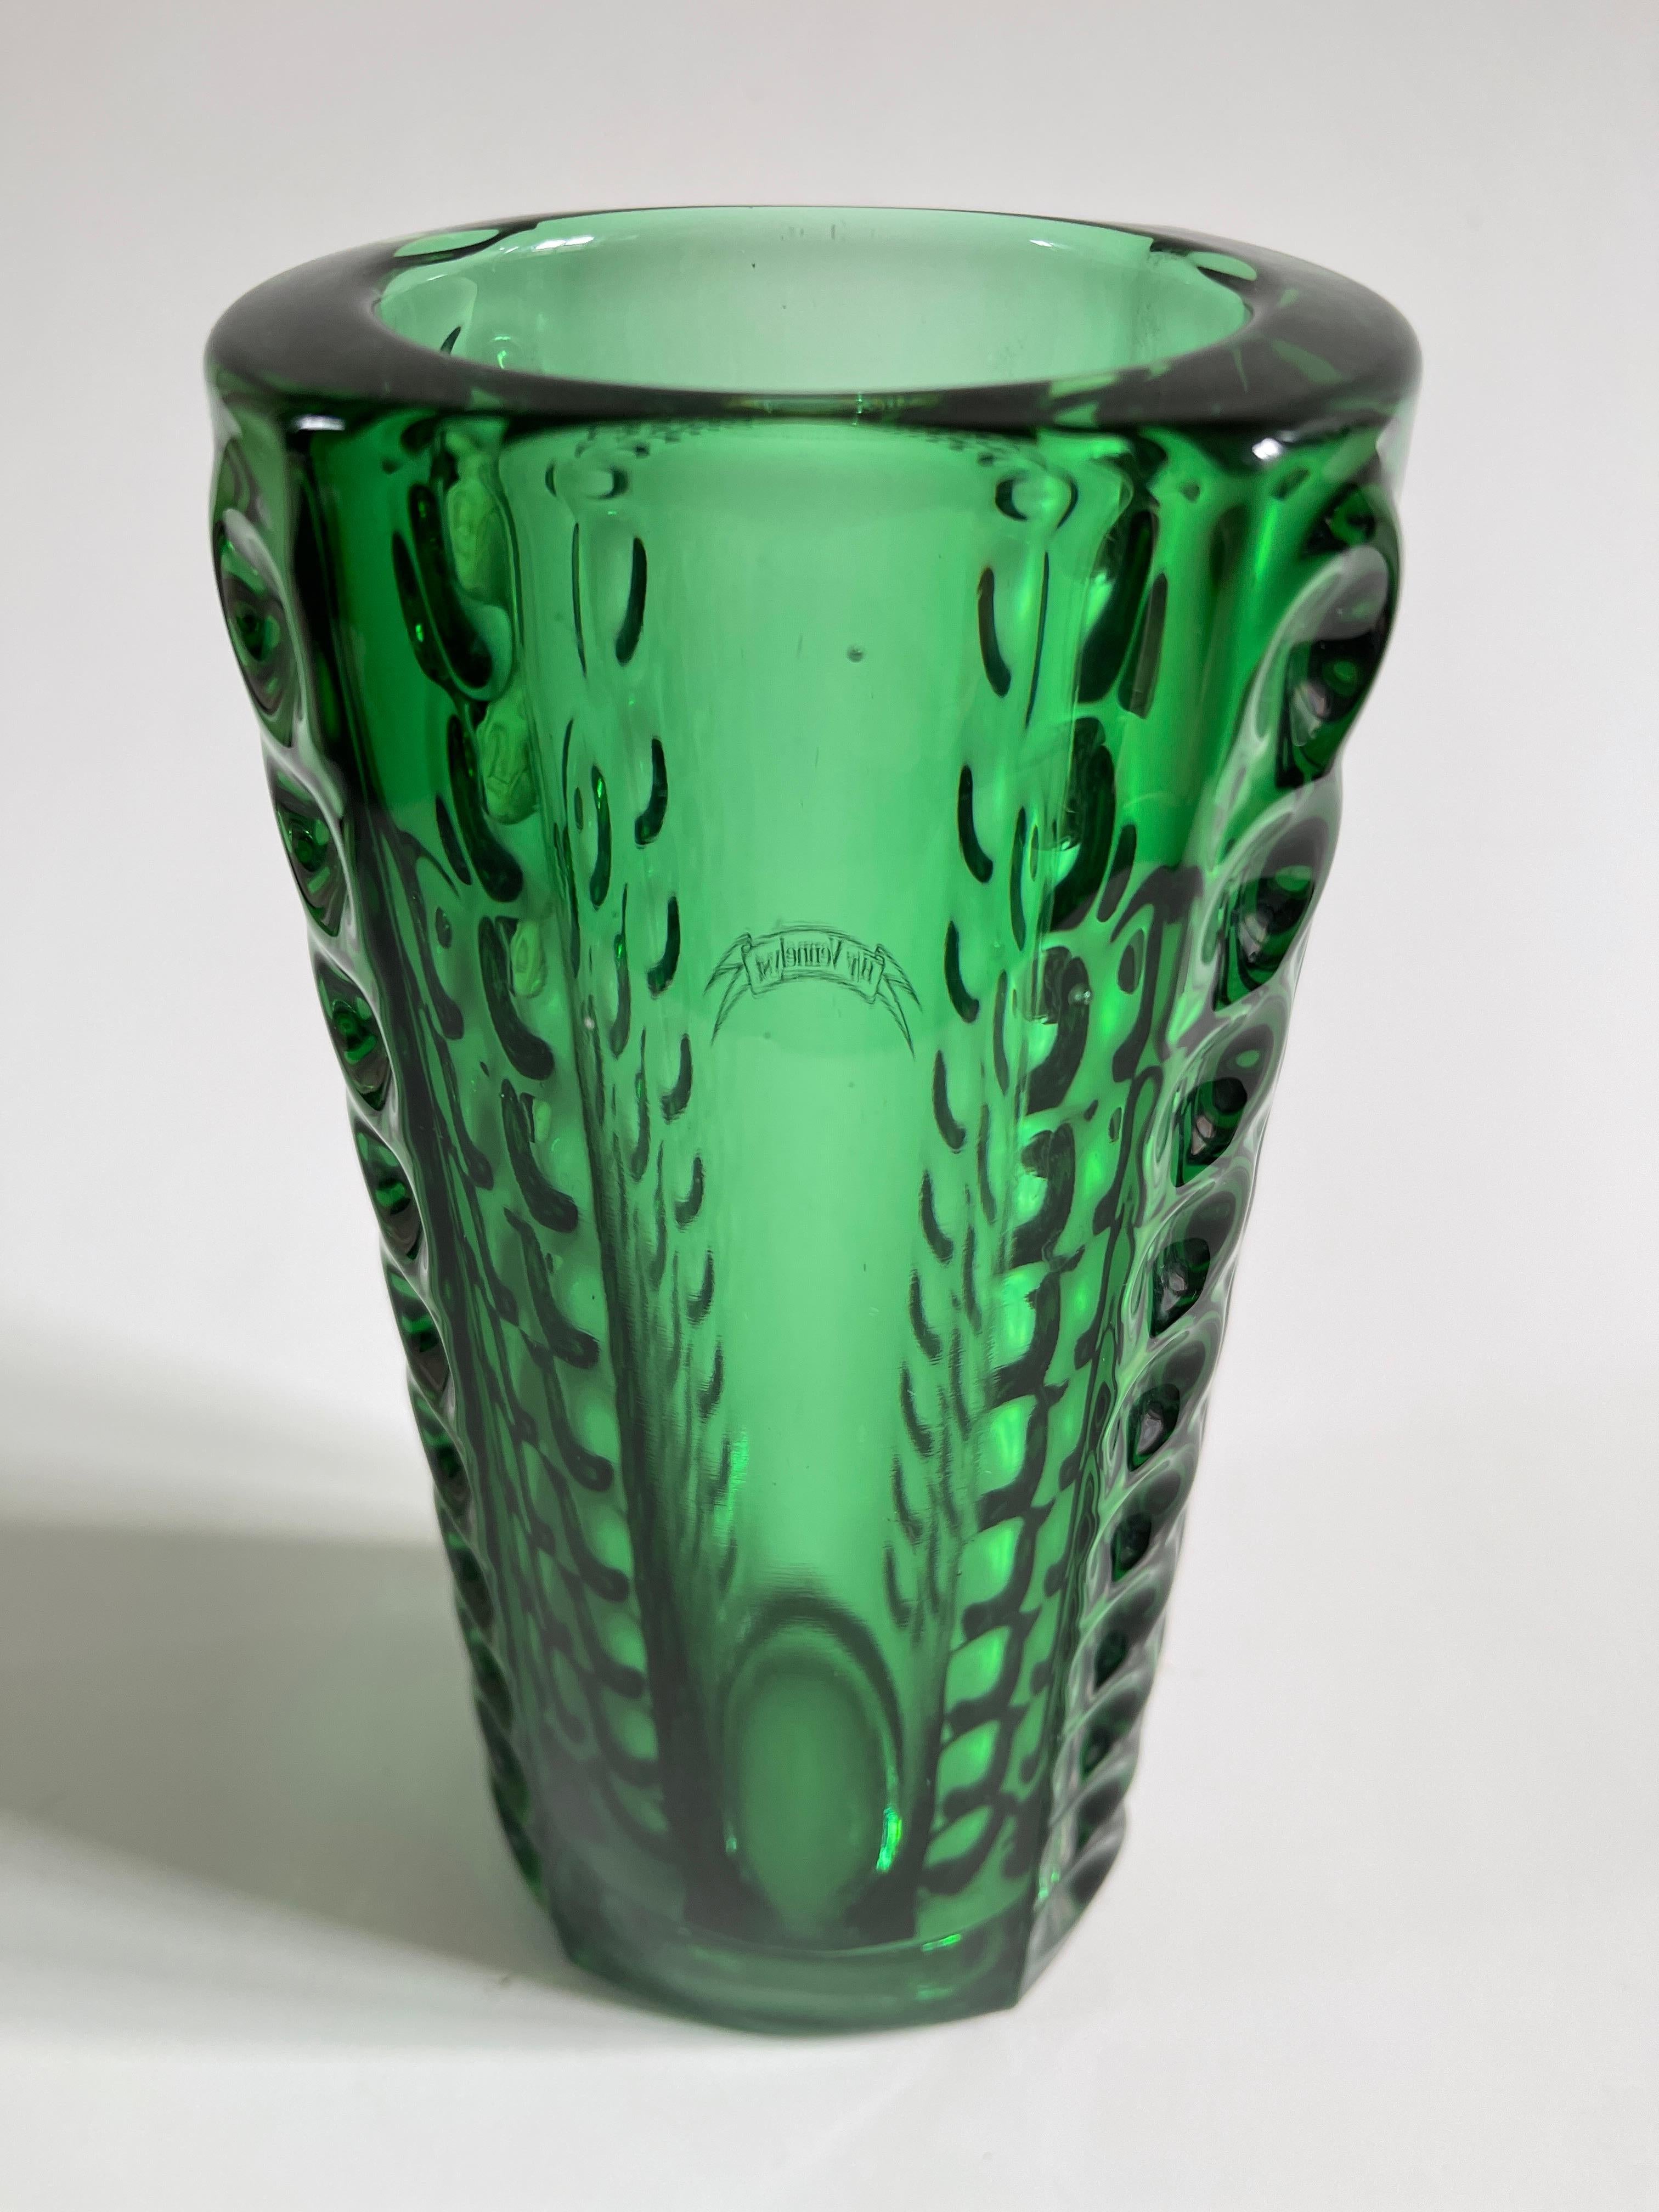 Emerald Green Optical Glass Vase by Rudolf Jurnikl, 1960s In Good Condition For Sale In New York, NY